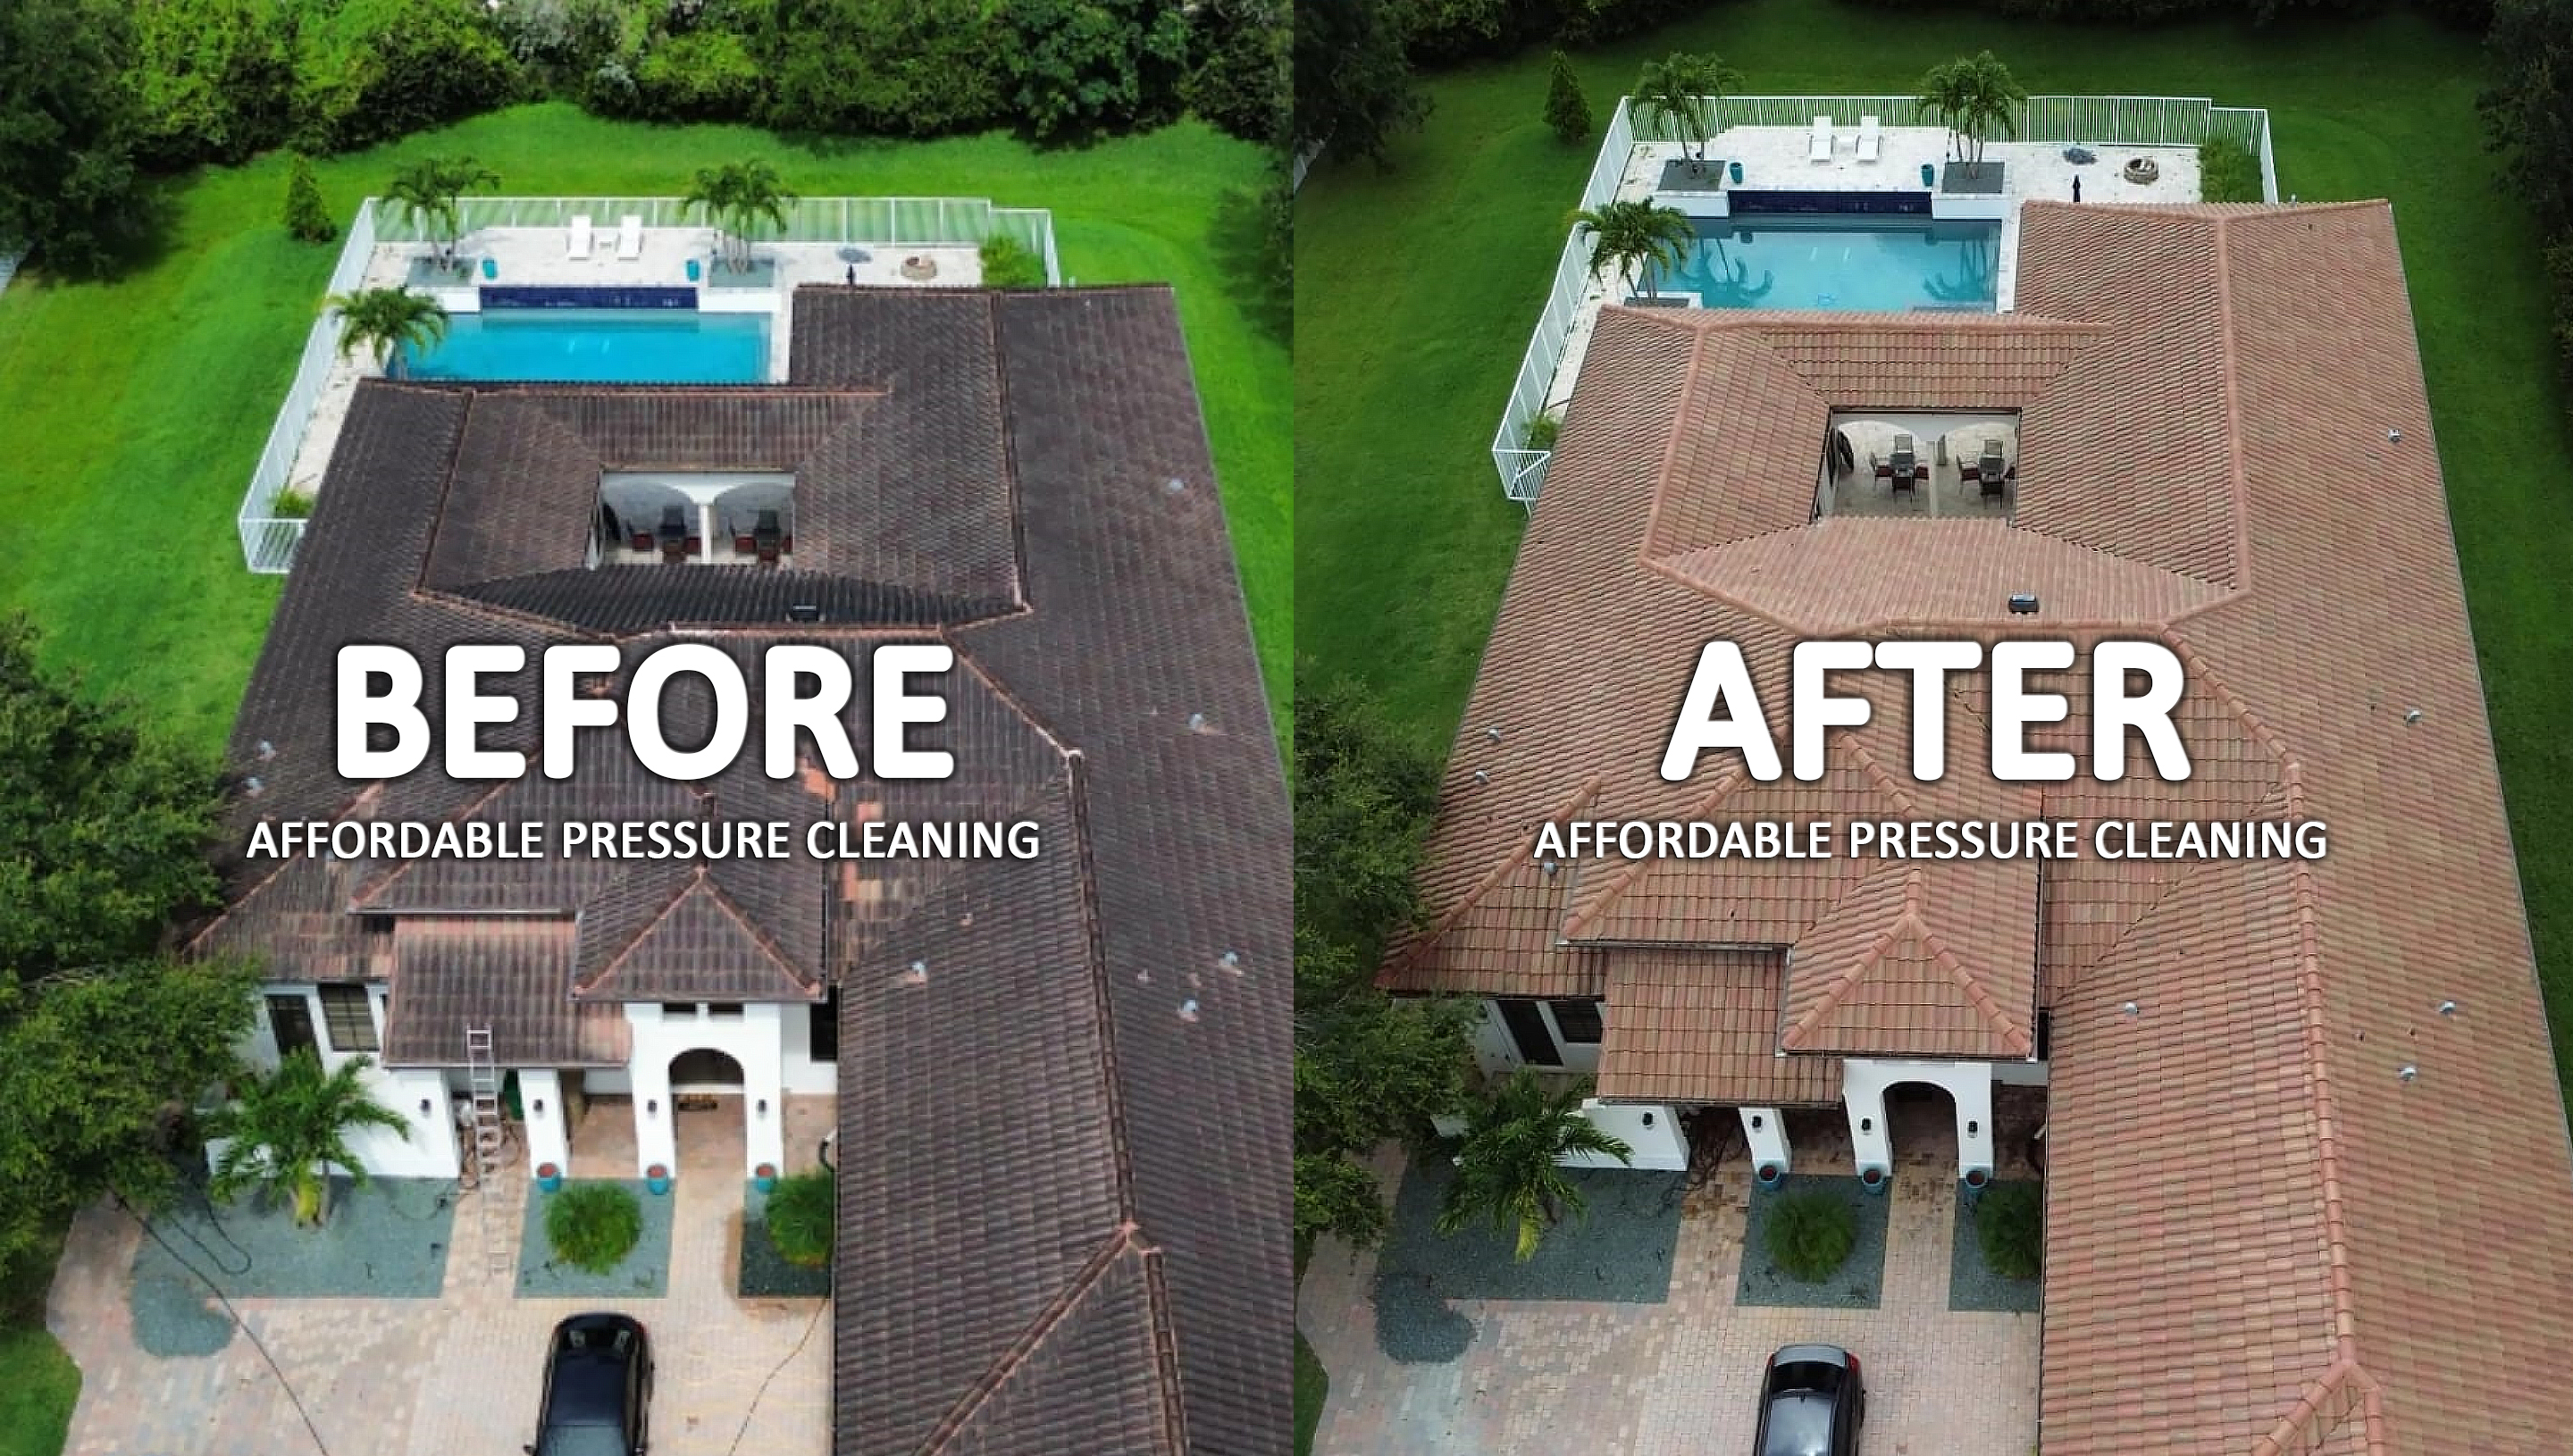 Affordable Pressure Cleaning